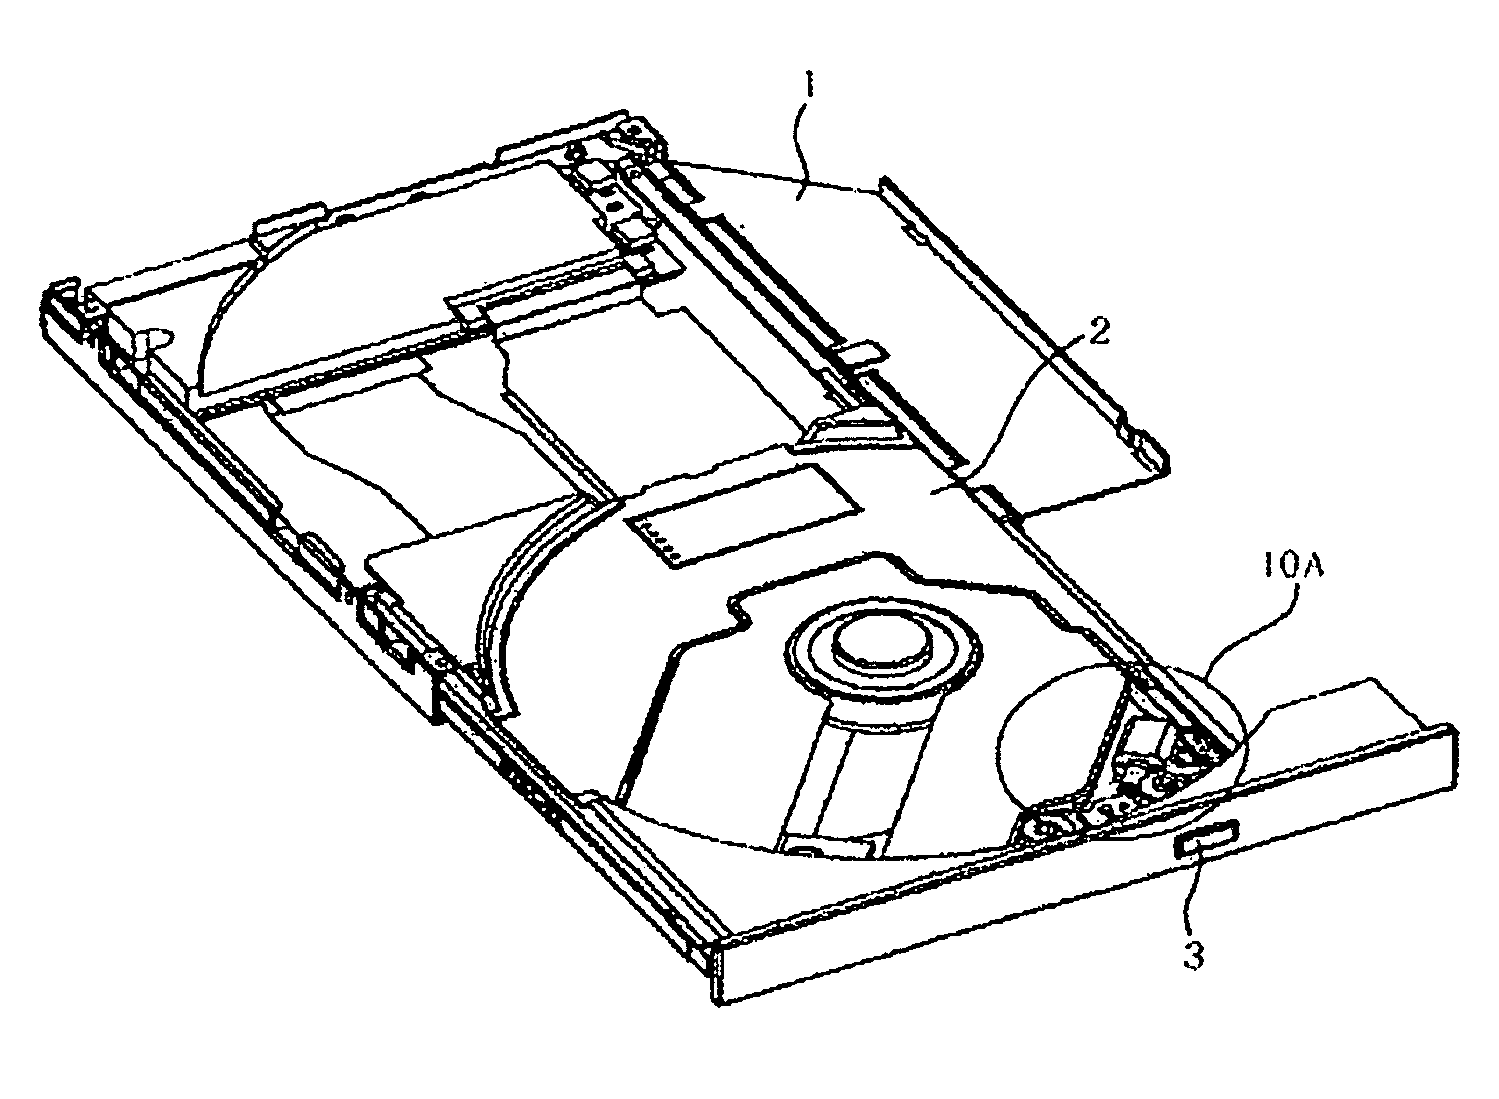 Tray locking mechanism used in an optical disk drive